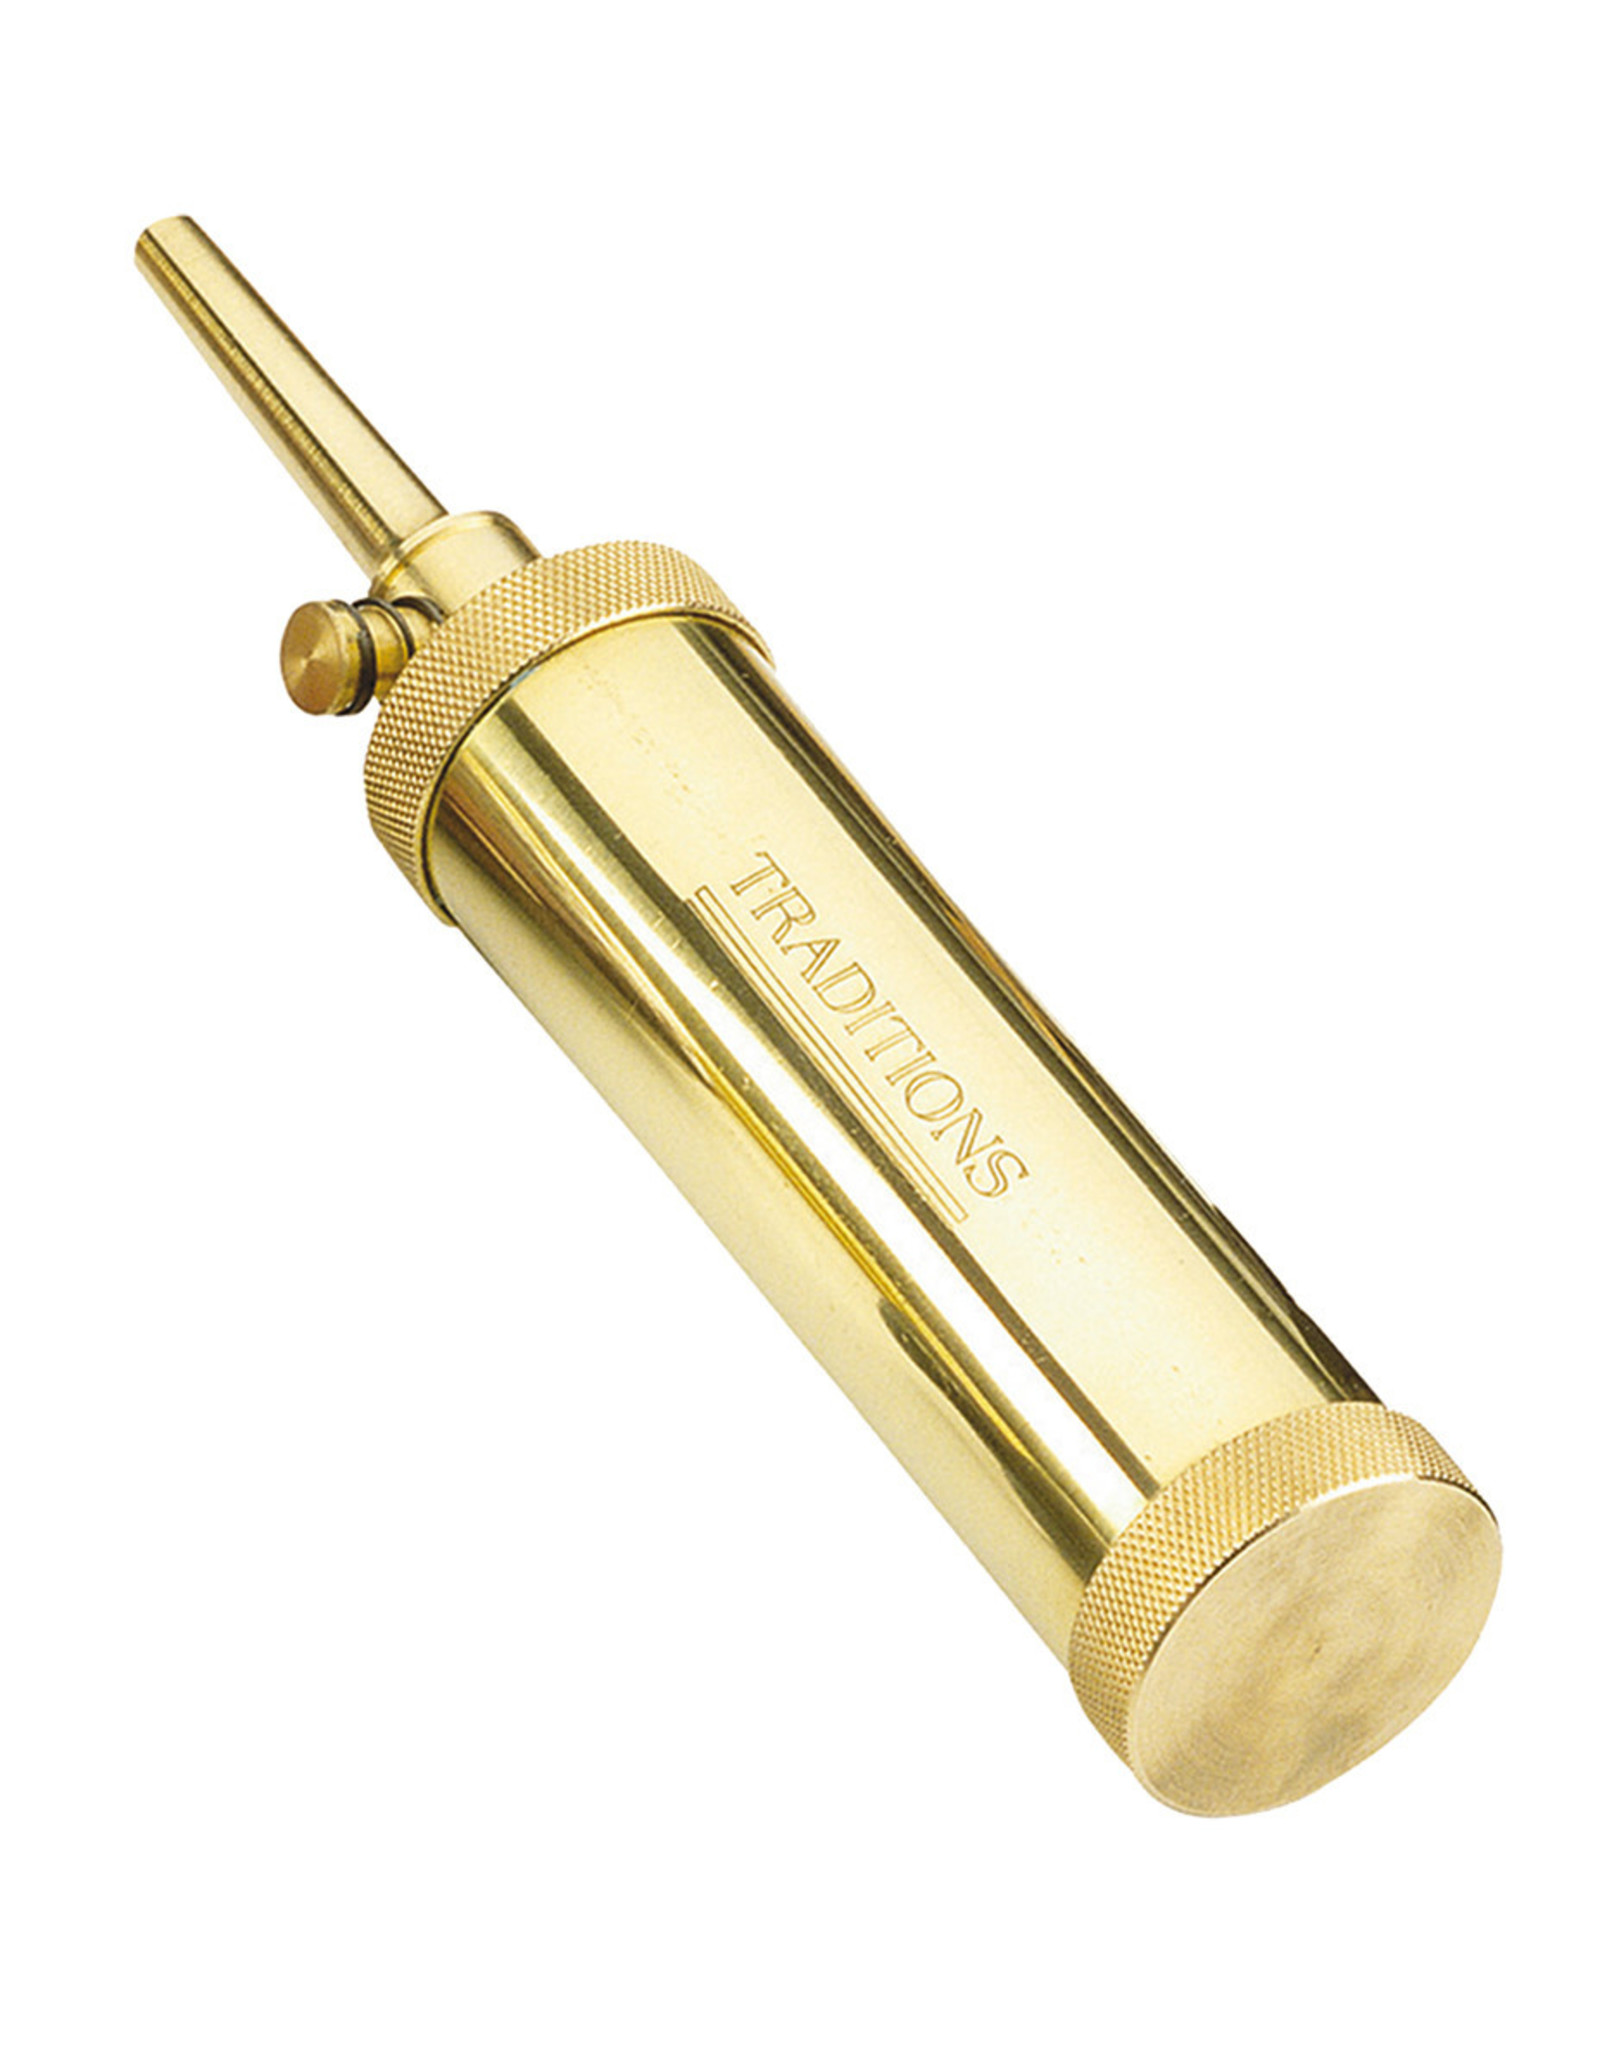 Traditions Traditions Deluxe Tubular Brass Flask - 30 gr Spout